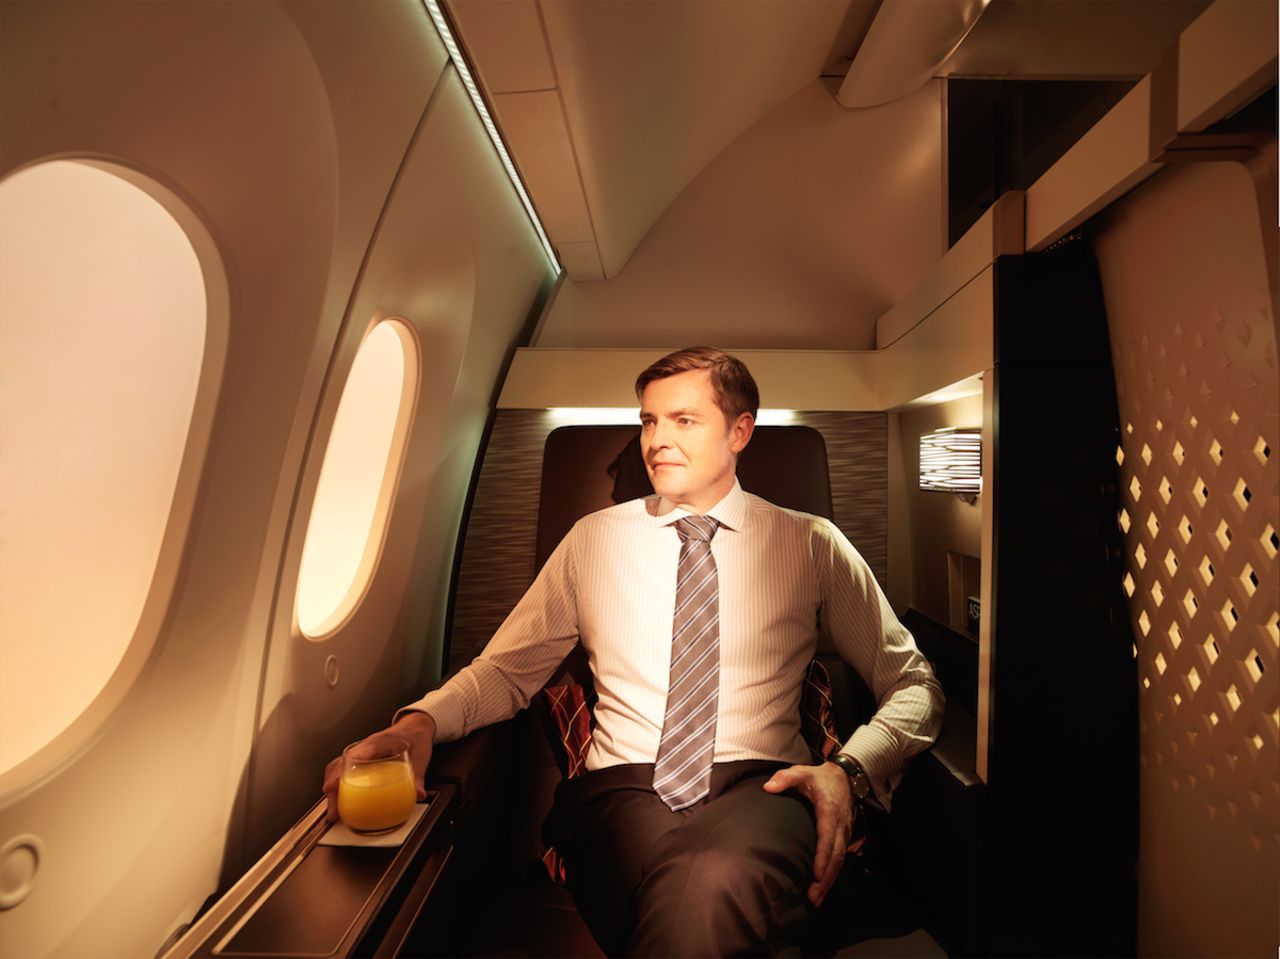 On its upgraded Boeing 787s, Etihad Airways will offer eight enhanced First Suites, with minibars and 26-inch-wide seats that convert to flat beds. Though few would scoff at one of these seats, private inflight suites aren't a new concept. Airlines such as rival Emirates offer similar first-class amenities. 